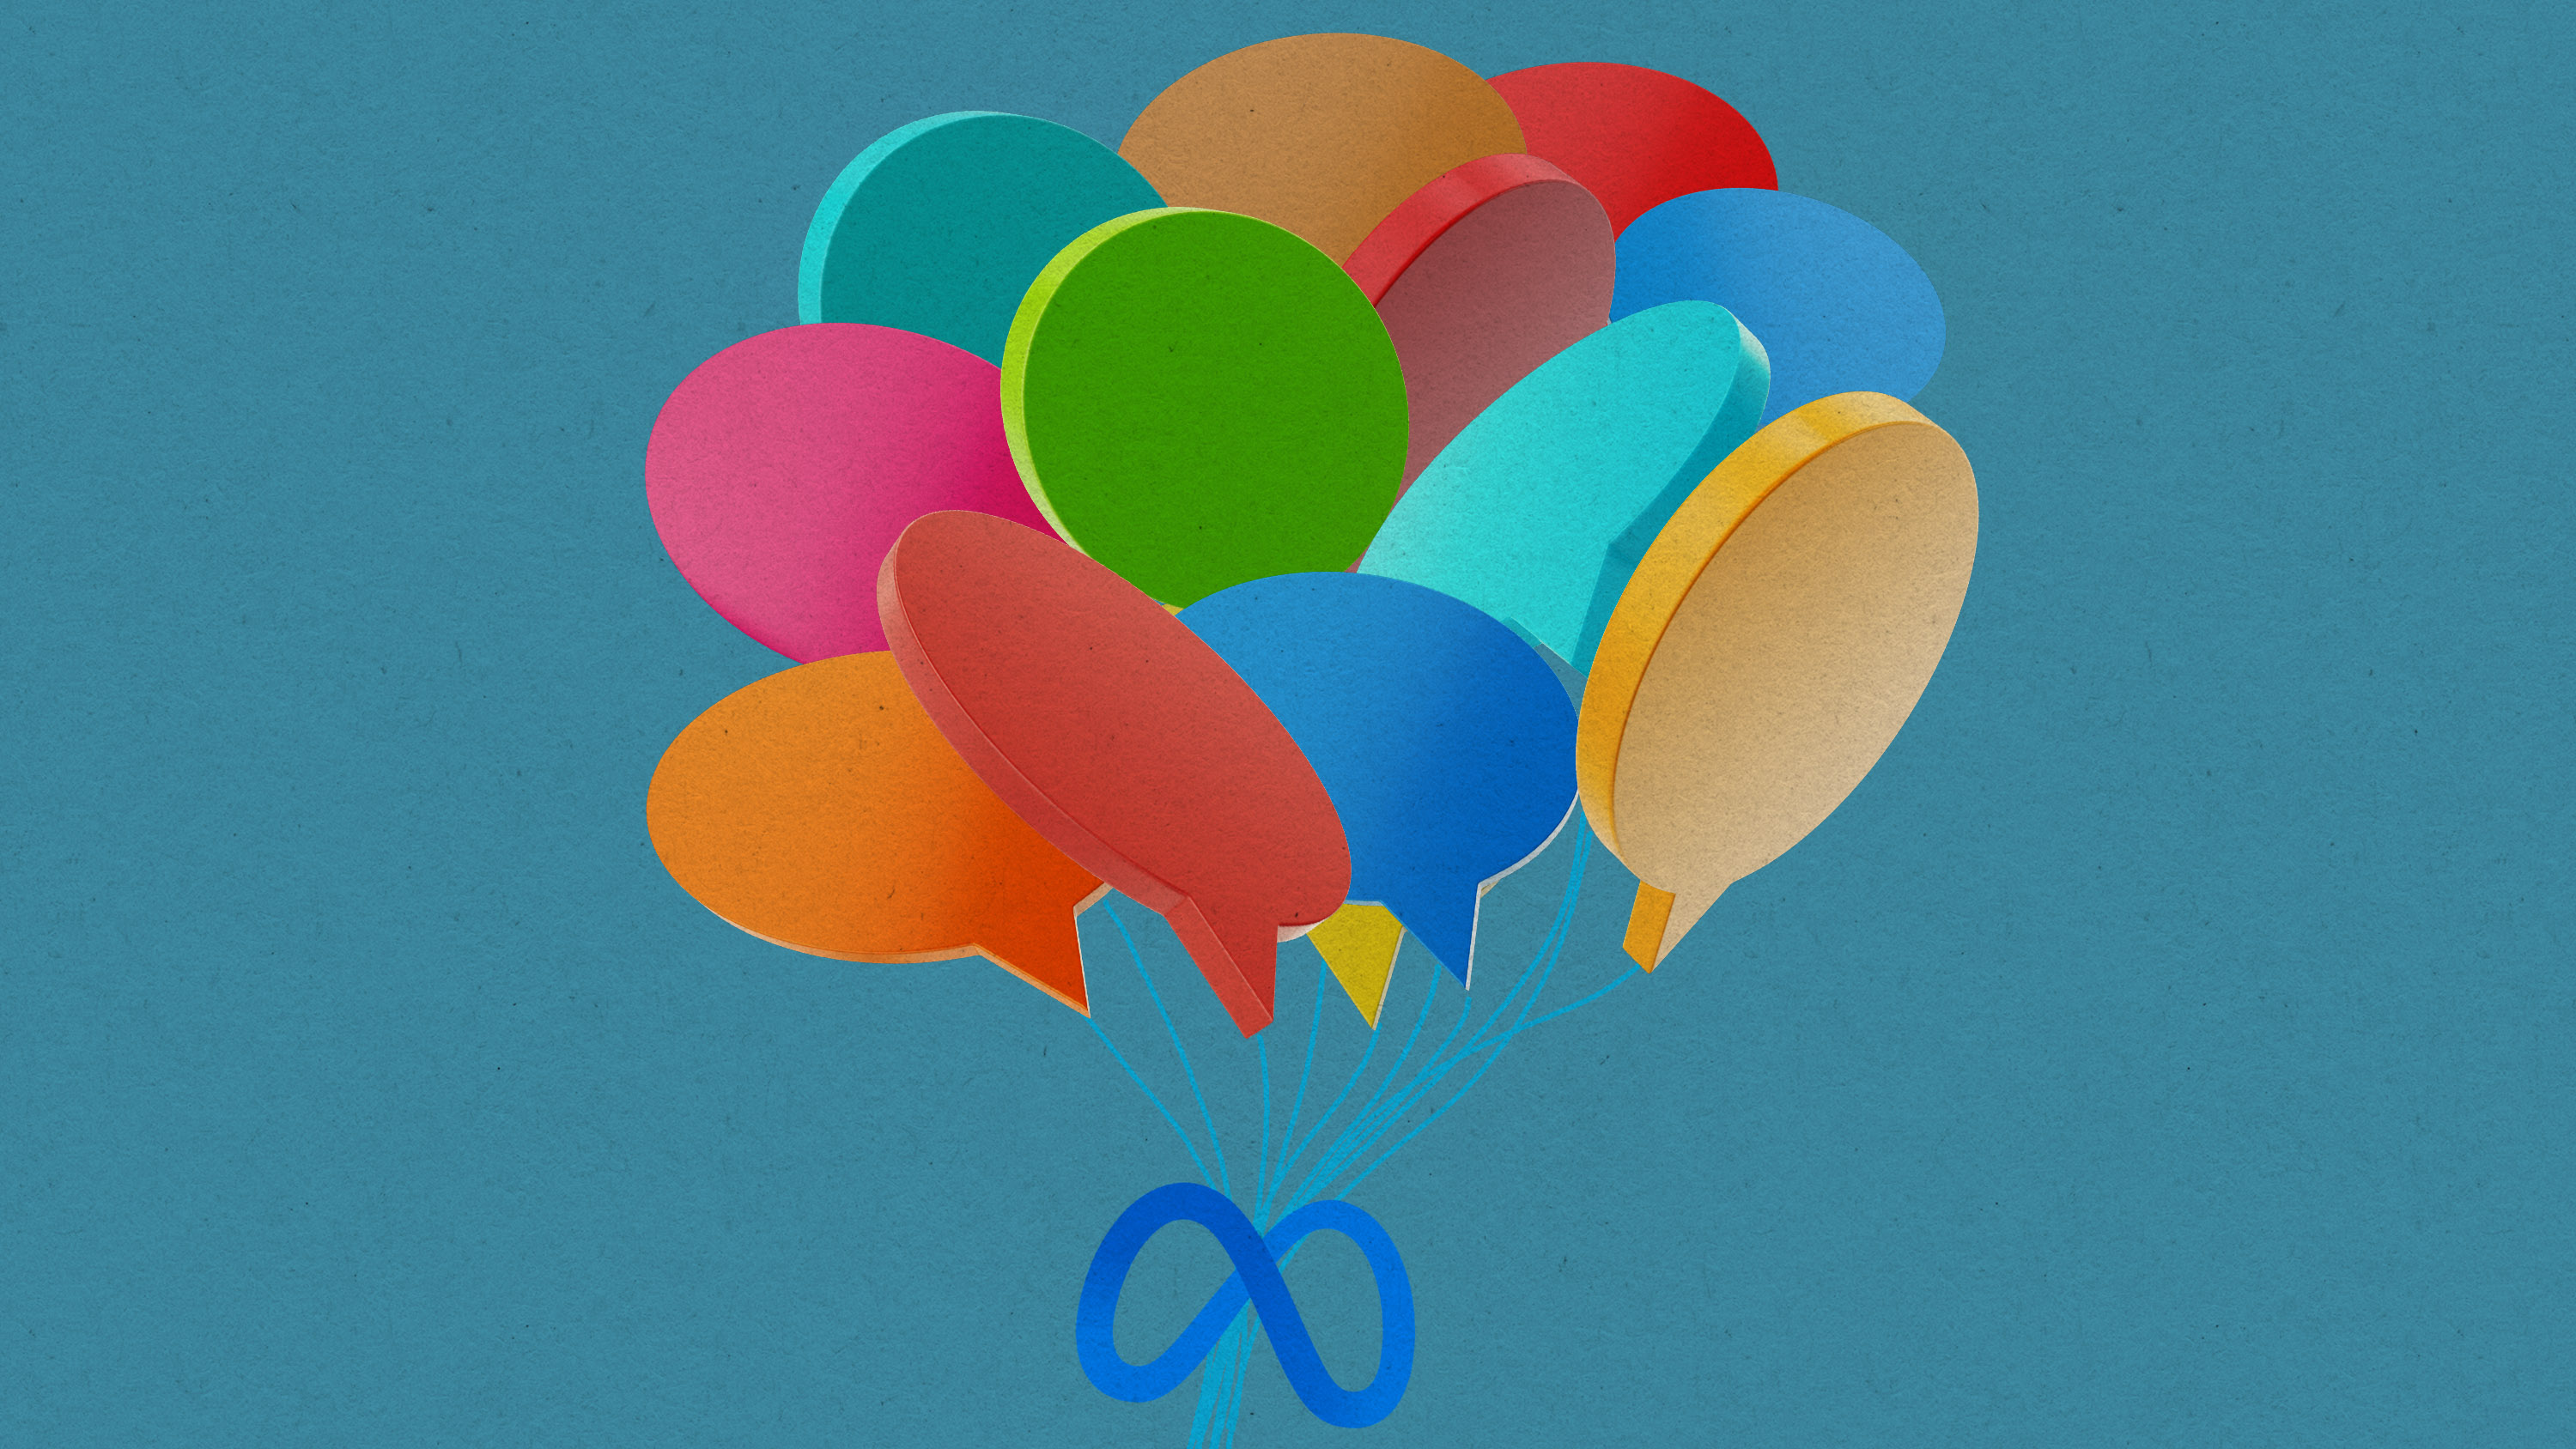 a group of colored balloons shaped like speech bubbles tied together in a bunch with the Meta logo